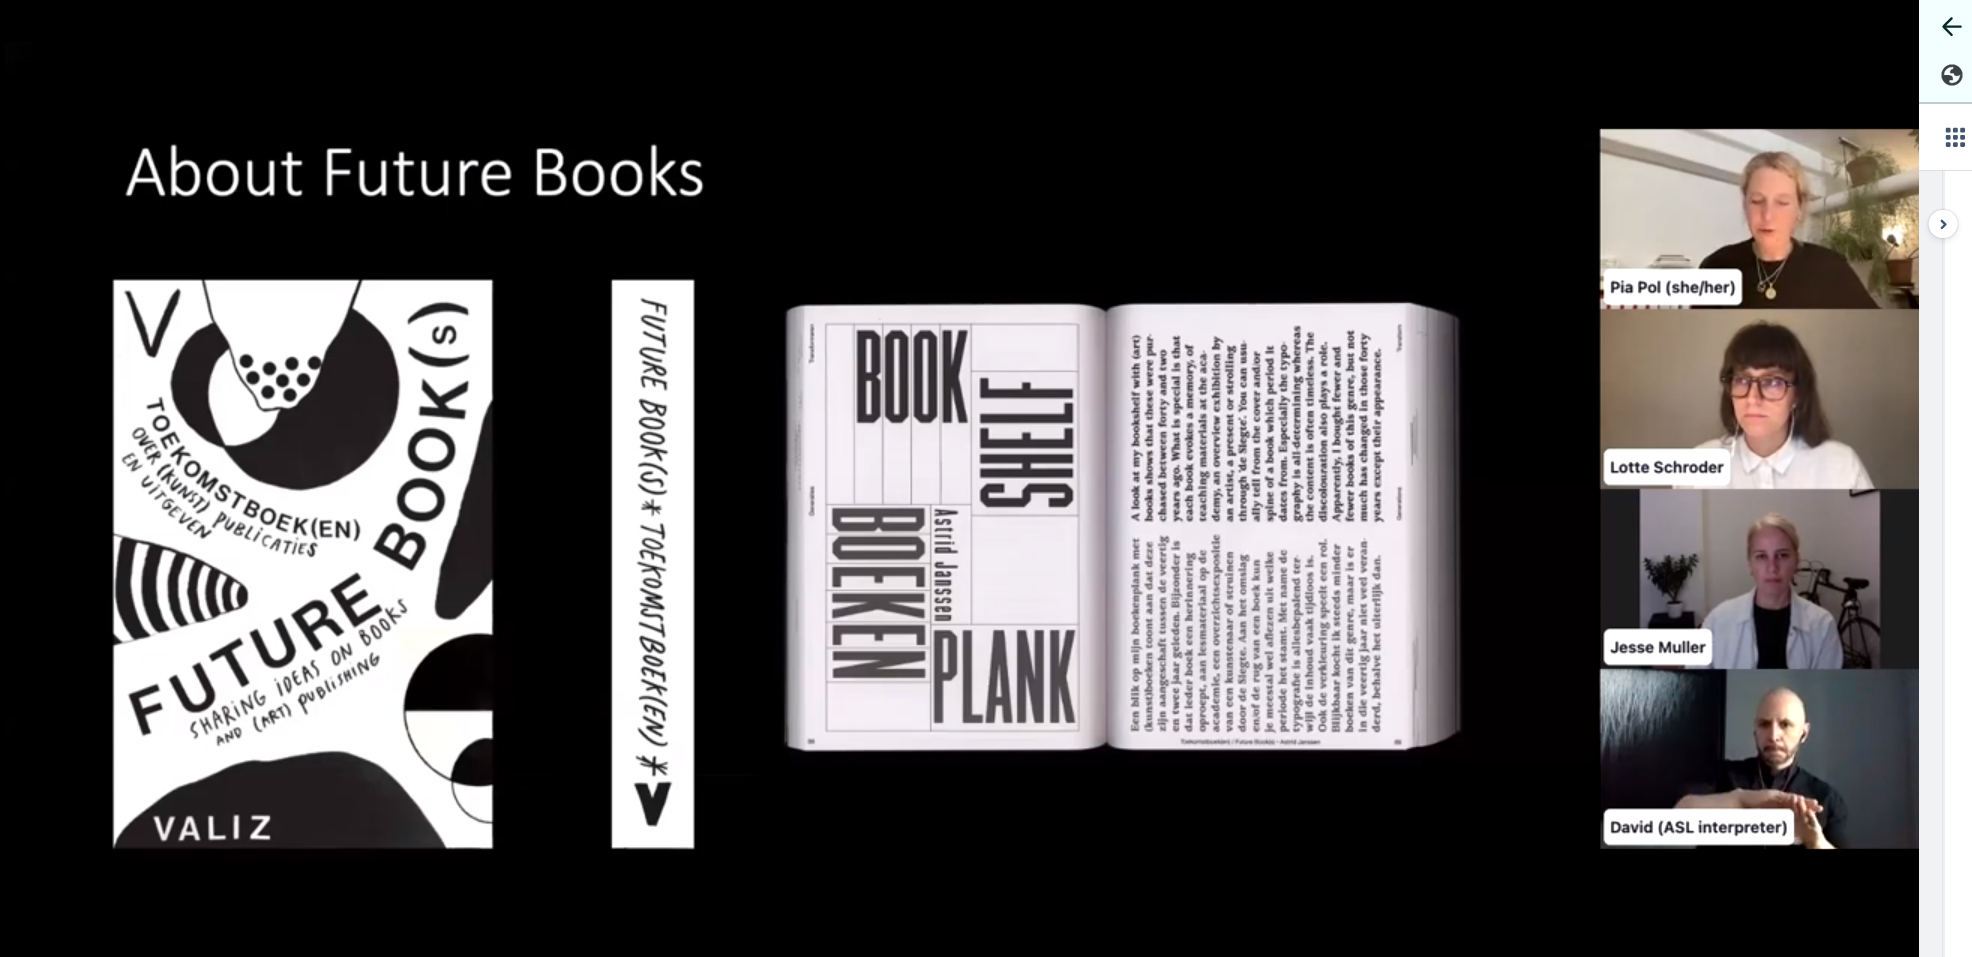 Screen capture from the Future Books presentation